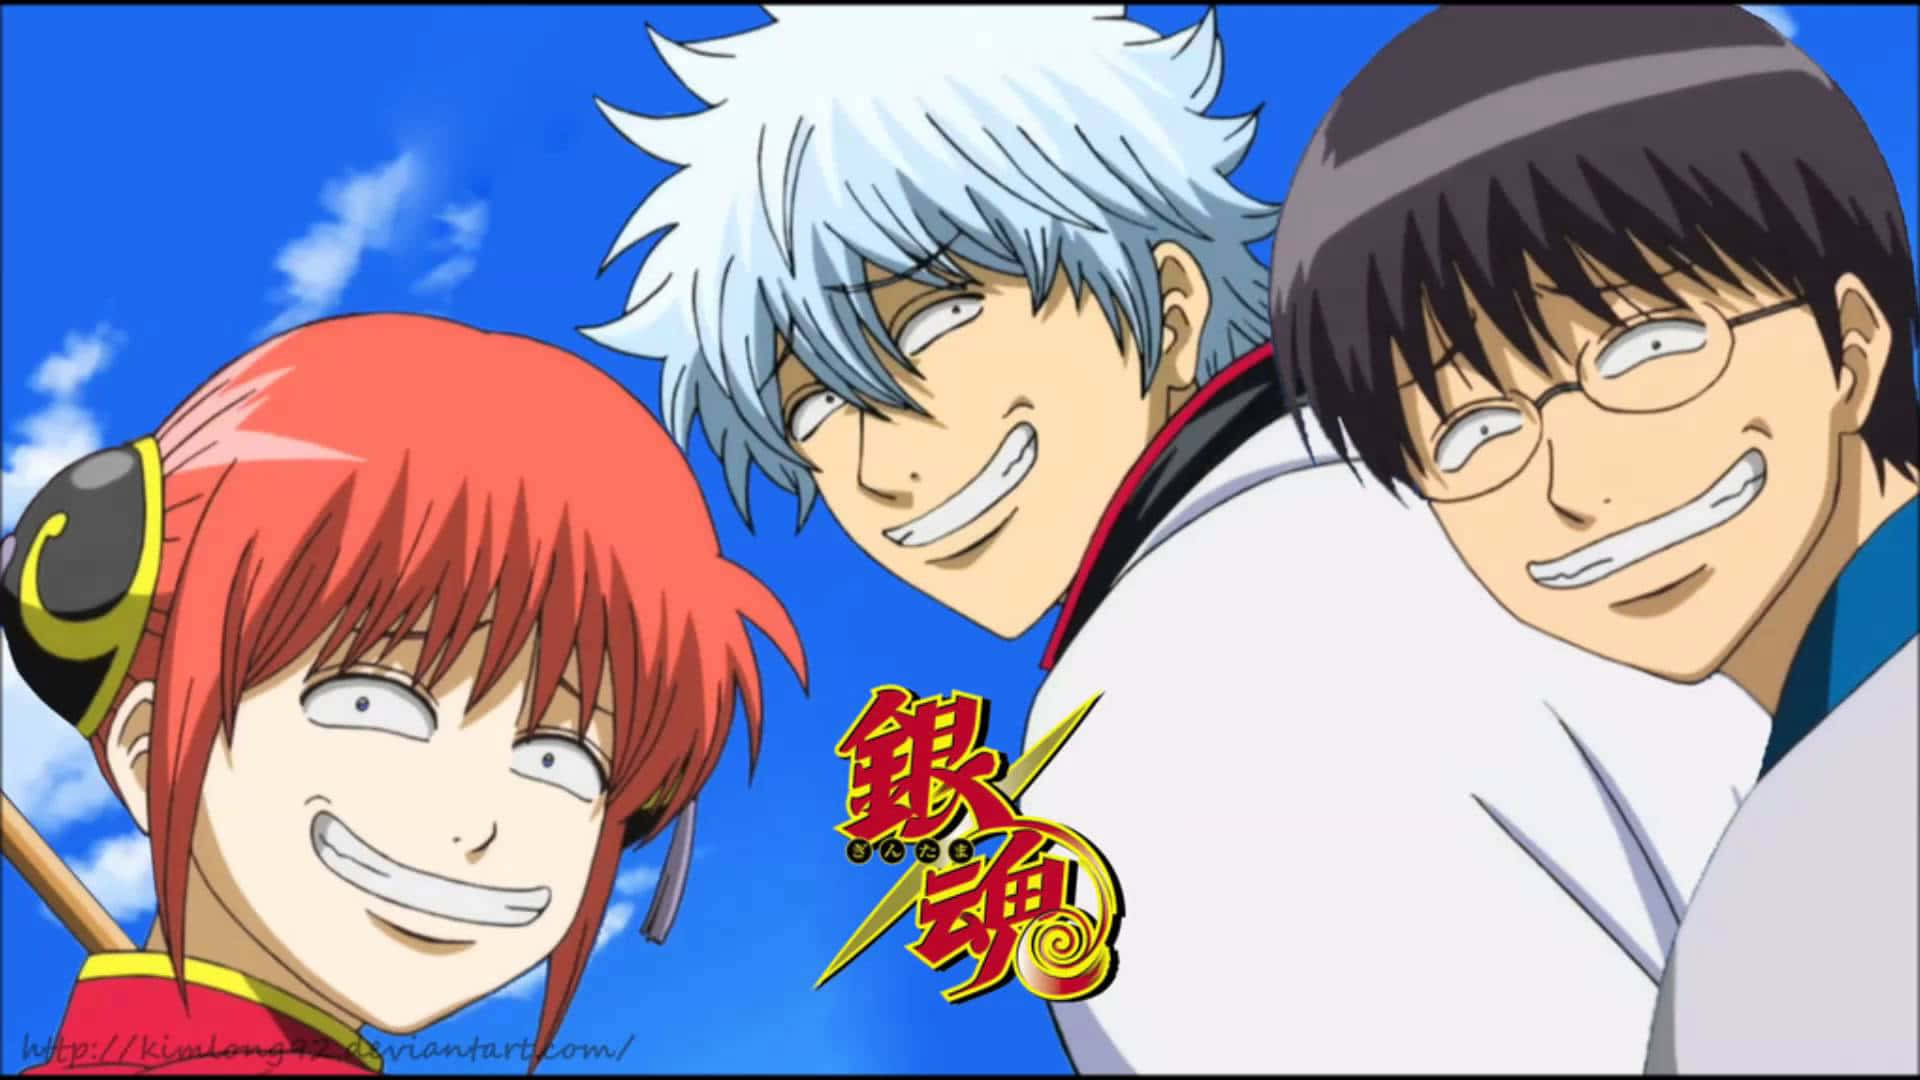 Gintoki and the gang face off against their arch-rival